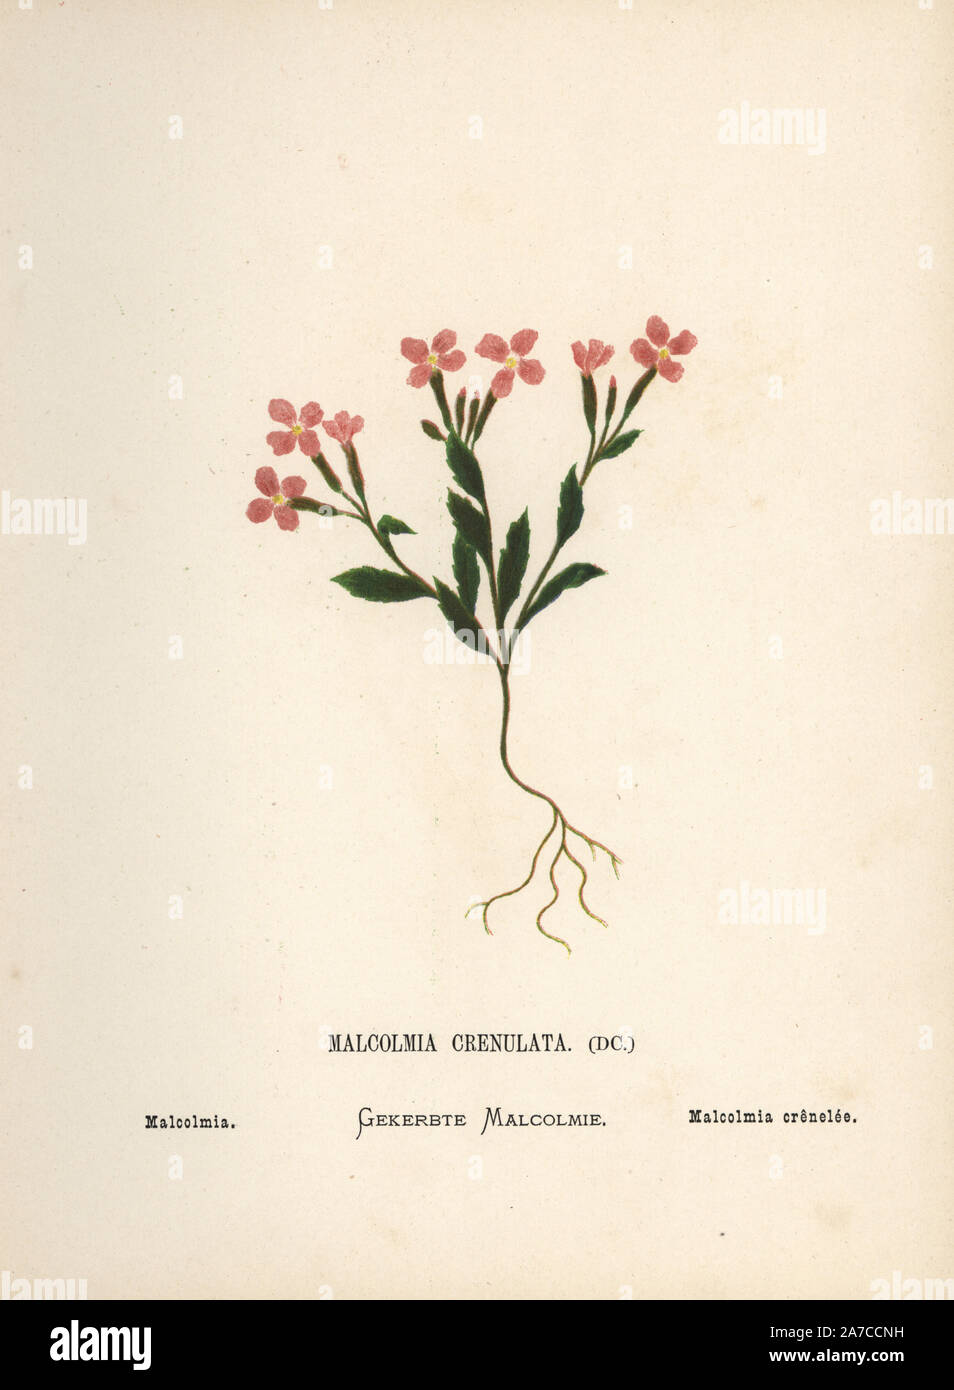 Malcolmia, Maresia meyeri Dvorak. Chromolithograph of a botanical illustration by Hannah Zeller from her own Wild Flowers of the Holy Land,' James Nisbet, London, 1876. Hannah Zeller (1838-1922) was a Swiss missionary who botanized near Nazareth for many years. Stock Photo